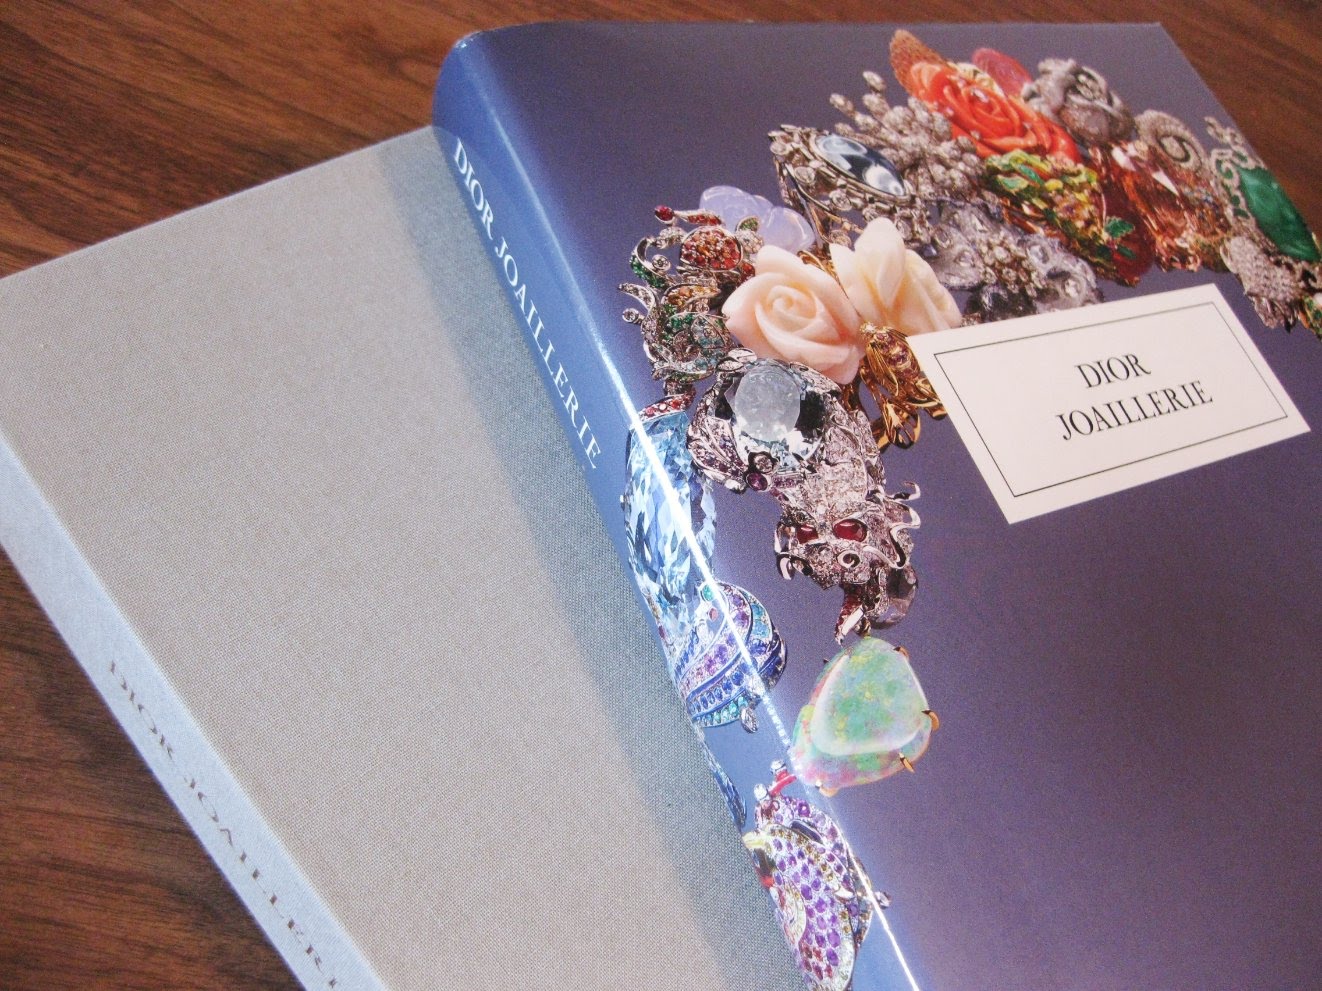 Dior JOAILLERIE 洋書 www.ch4x4.com